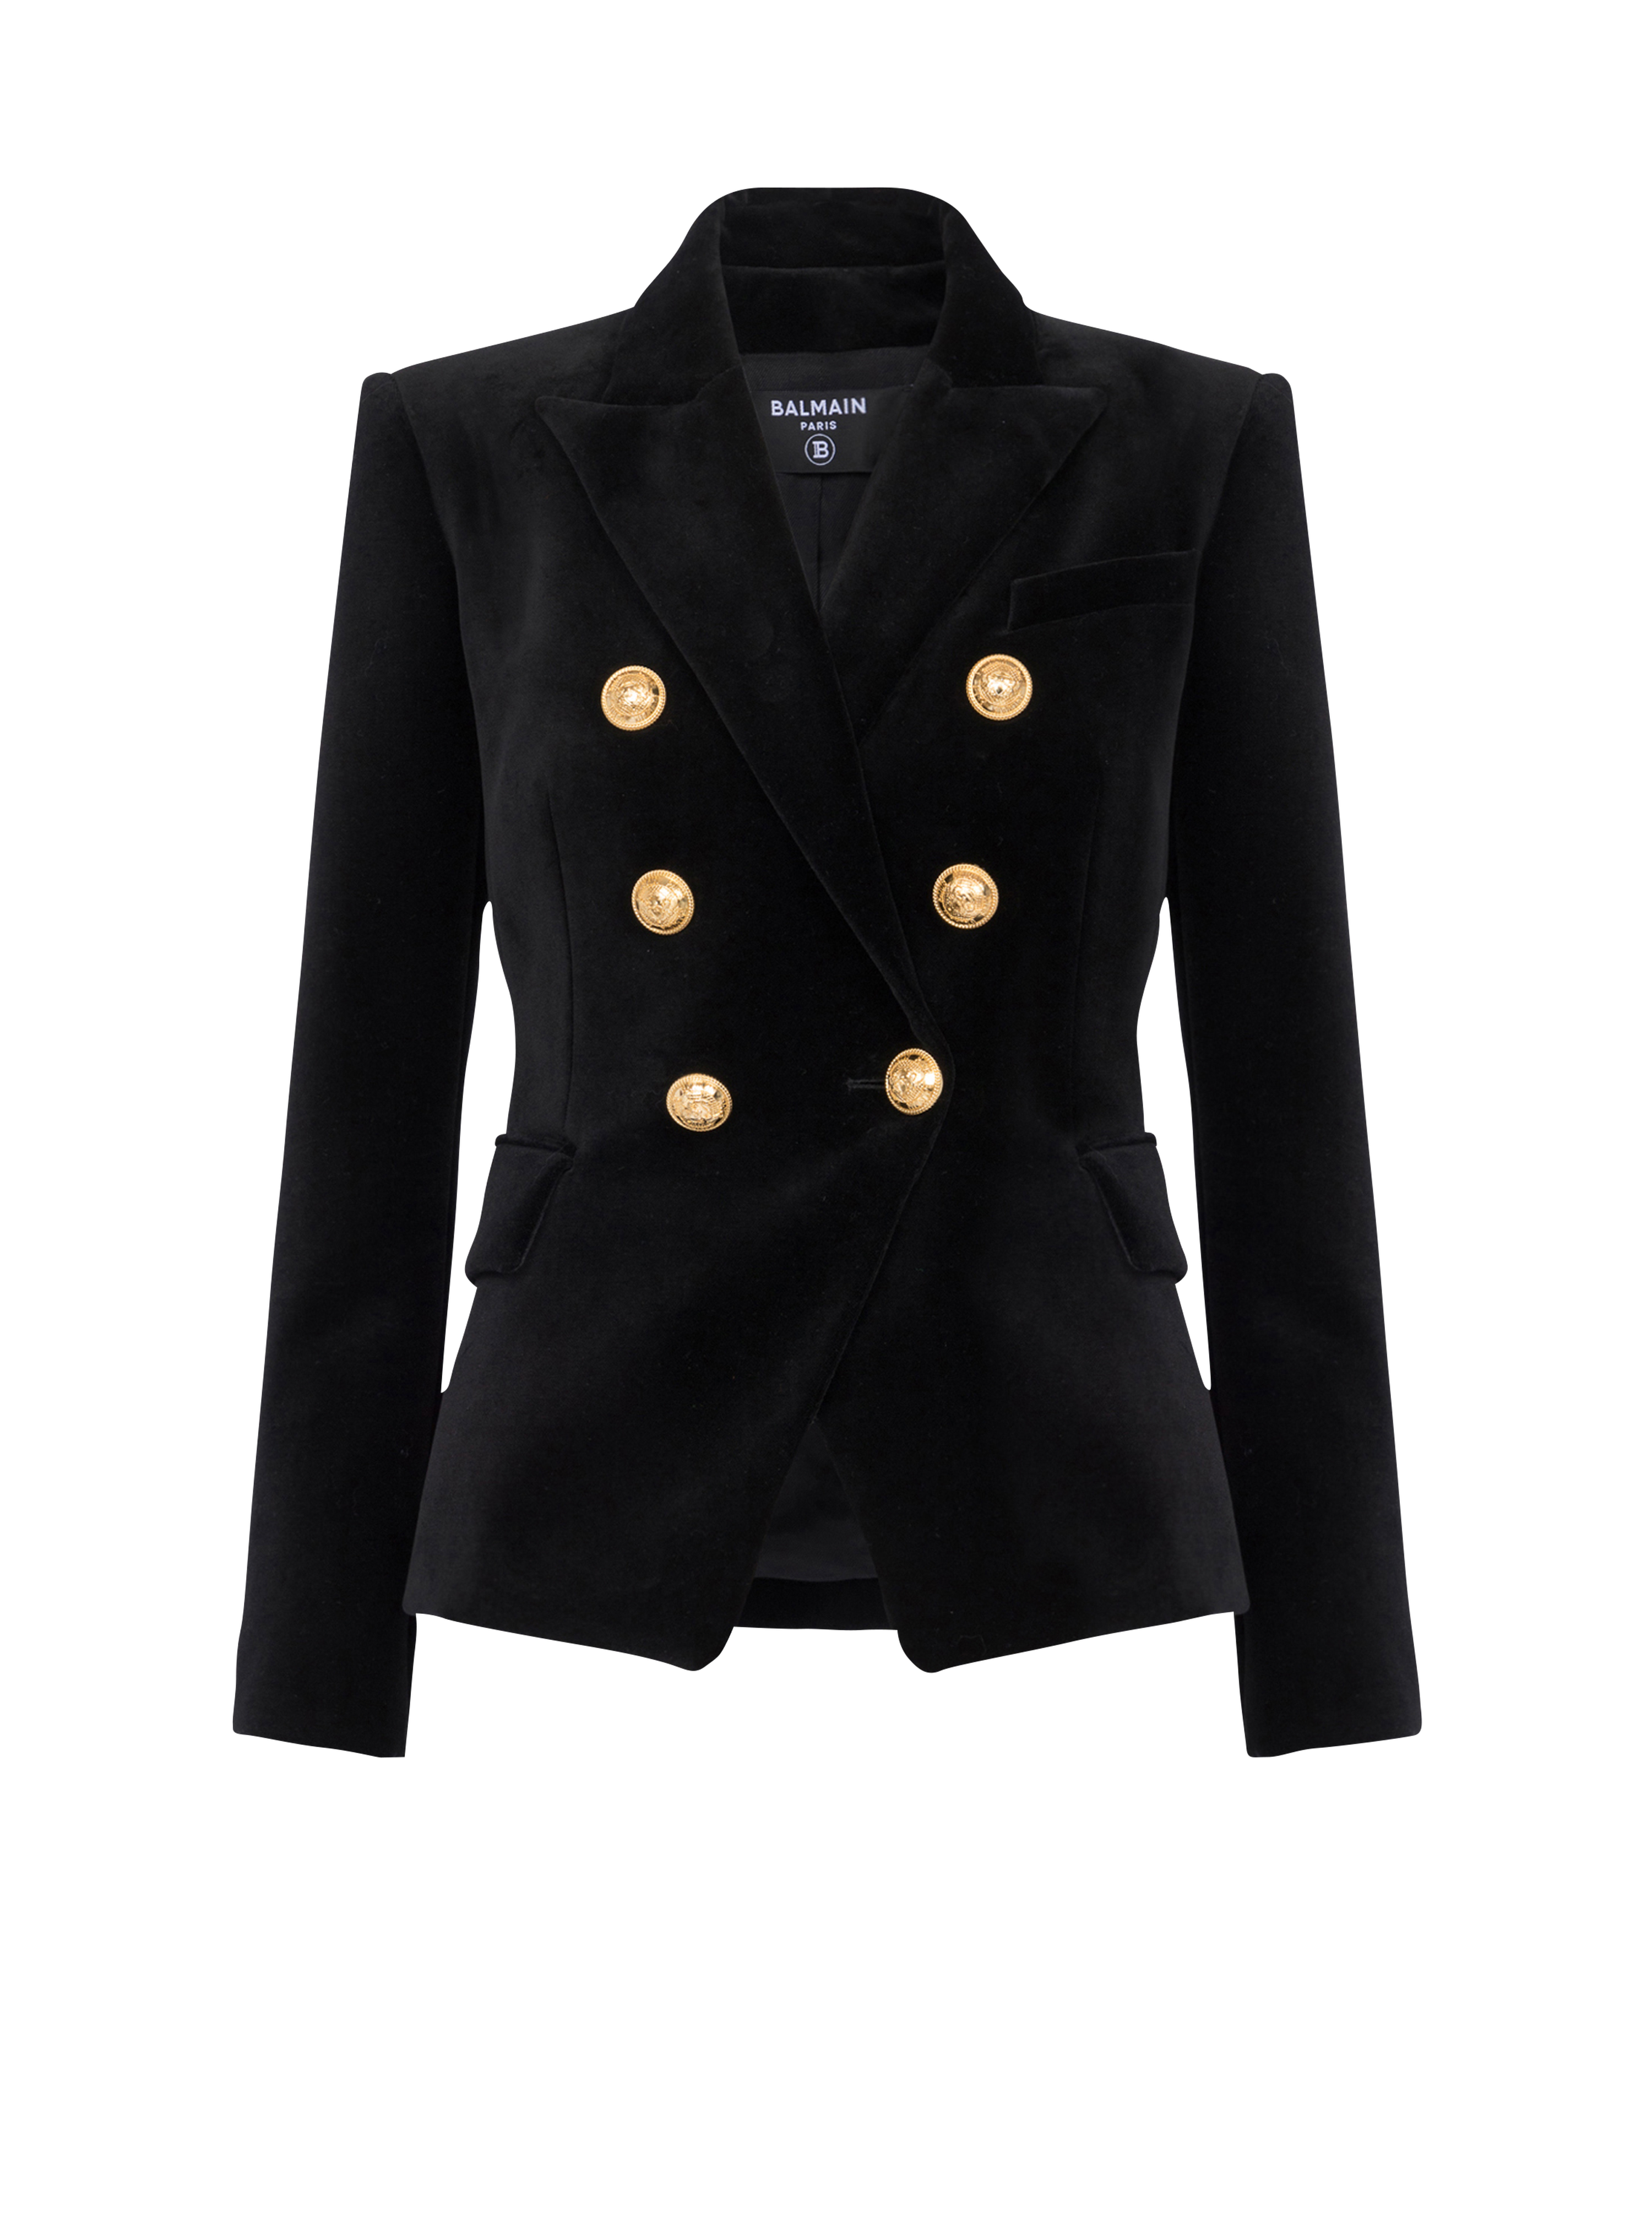 Velvet jacket with double-buttoned fastening, black, hi-res